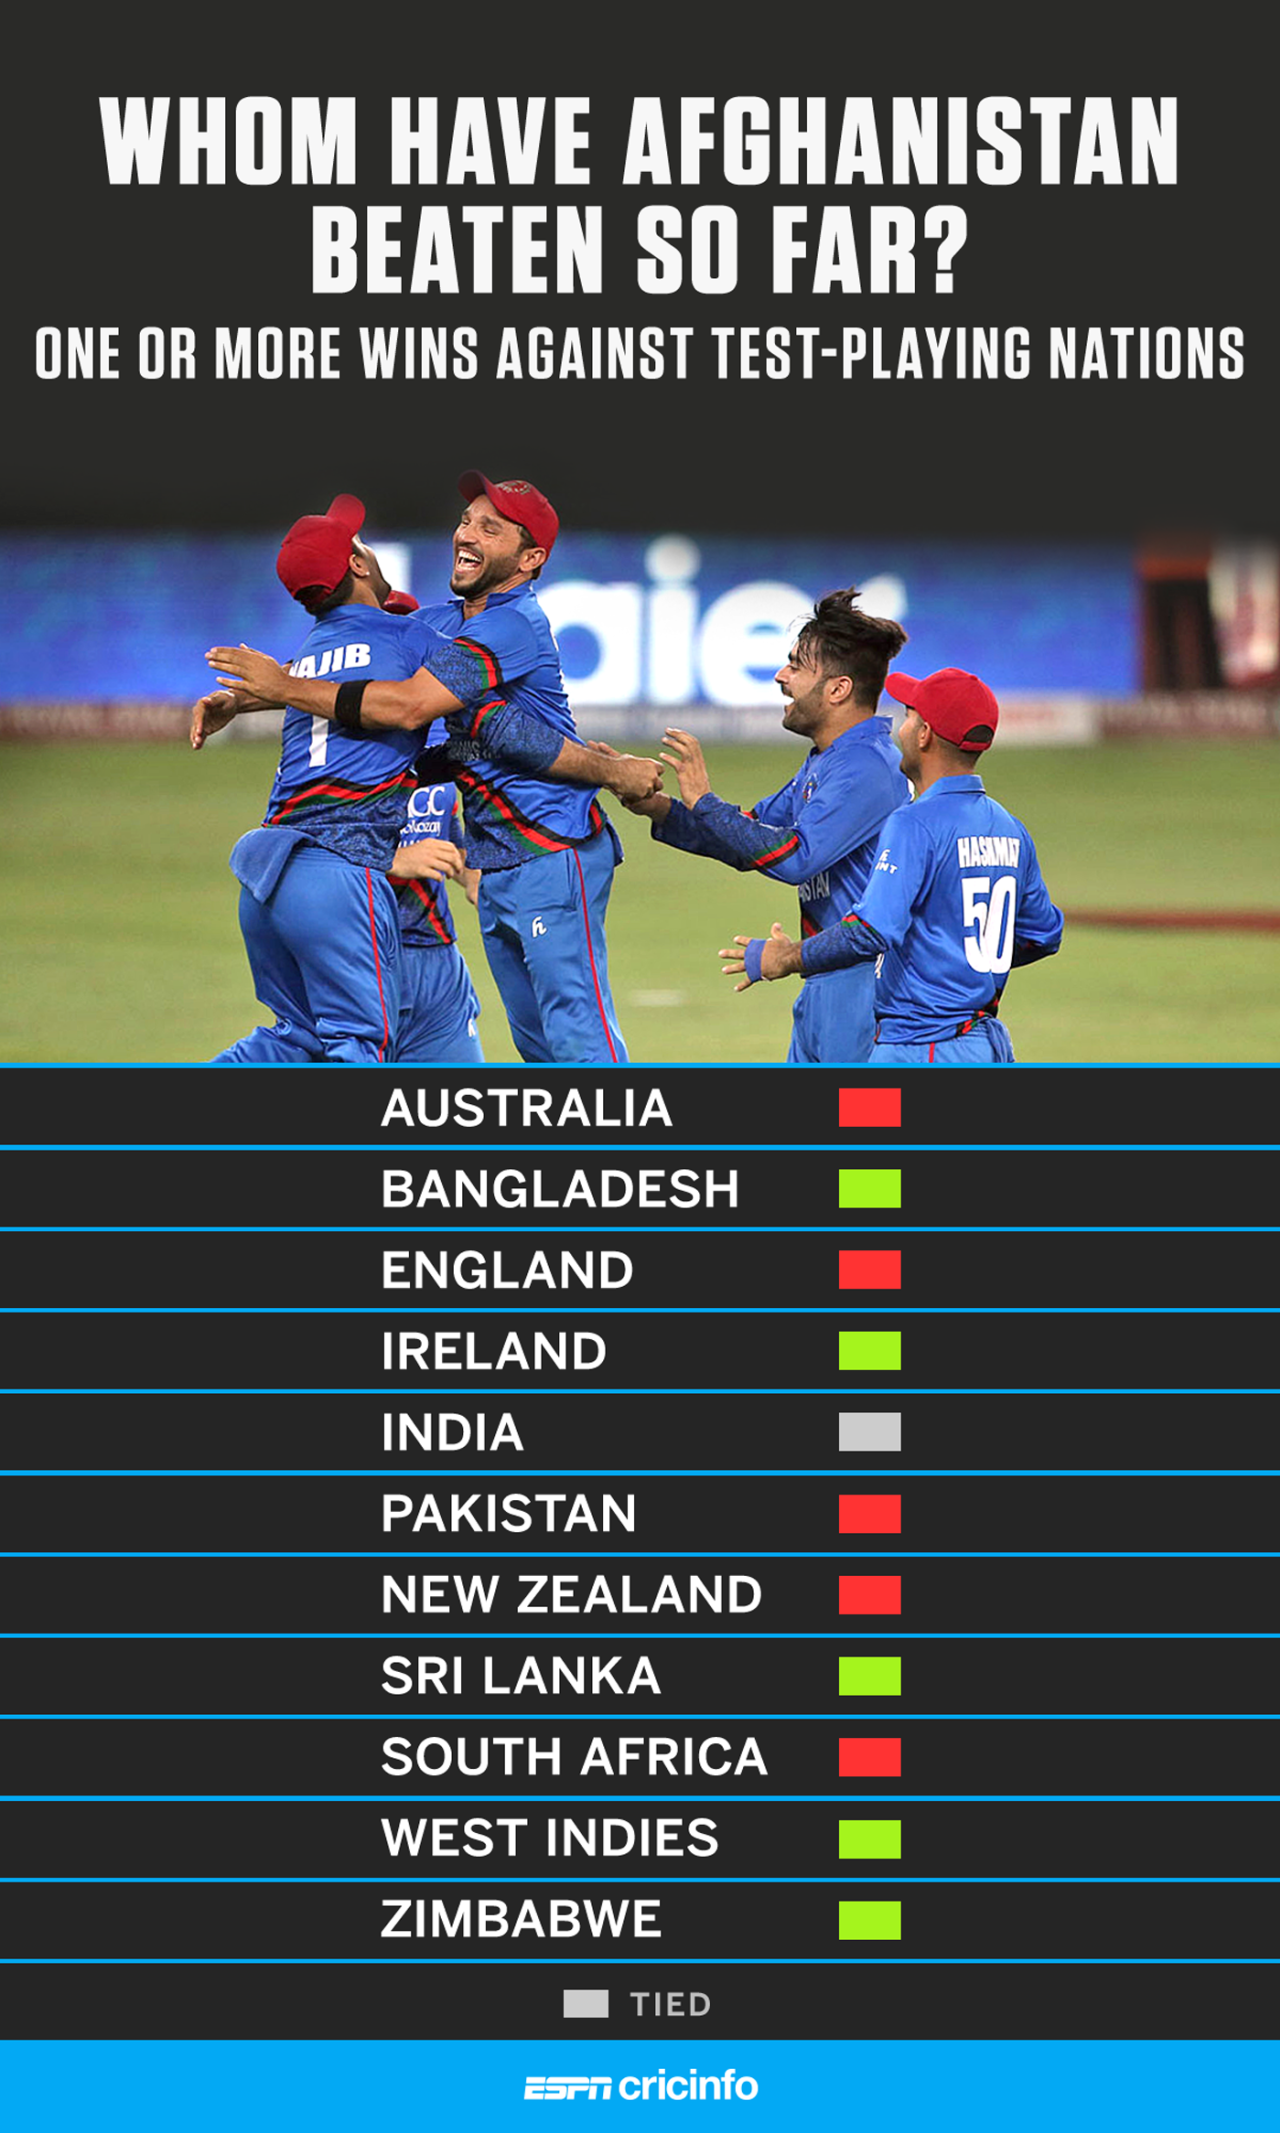 Afghanistan have beaten five Test playing nations in ODIs and T20Is, September 26, 2018